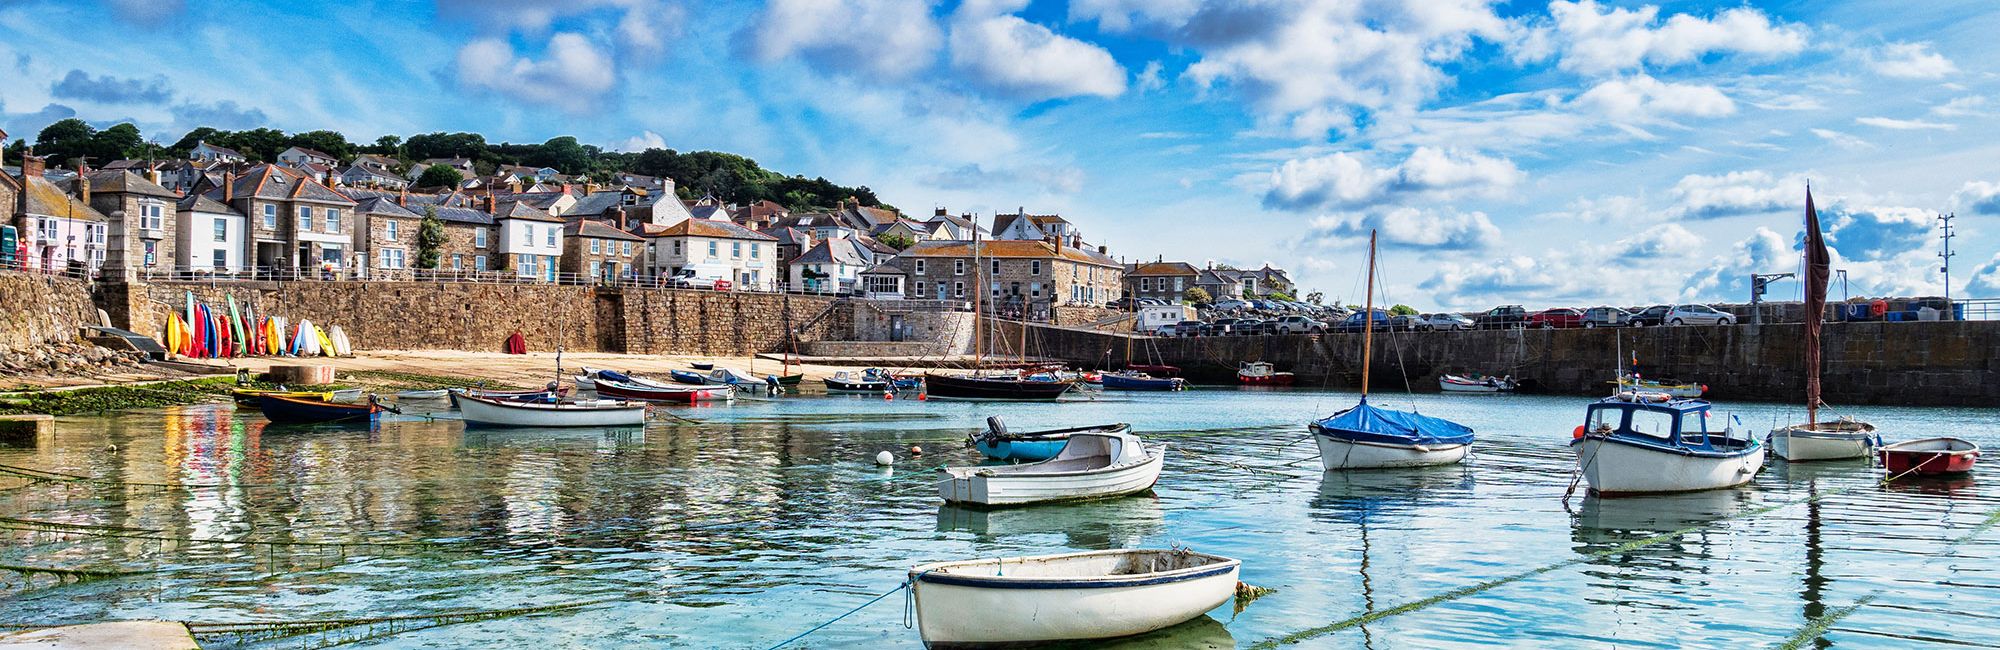 Mousehole in Cornwall